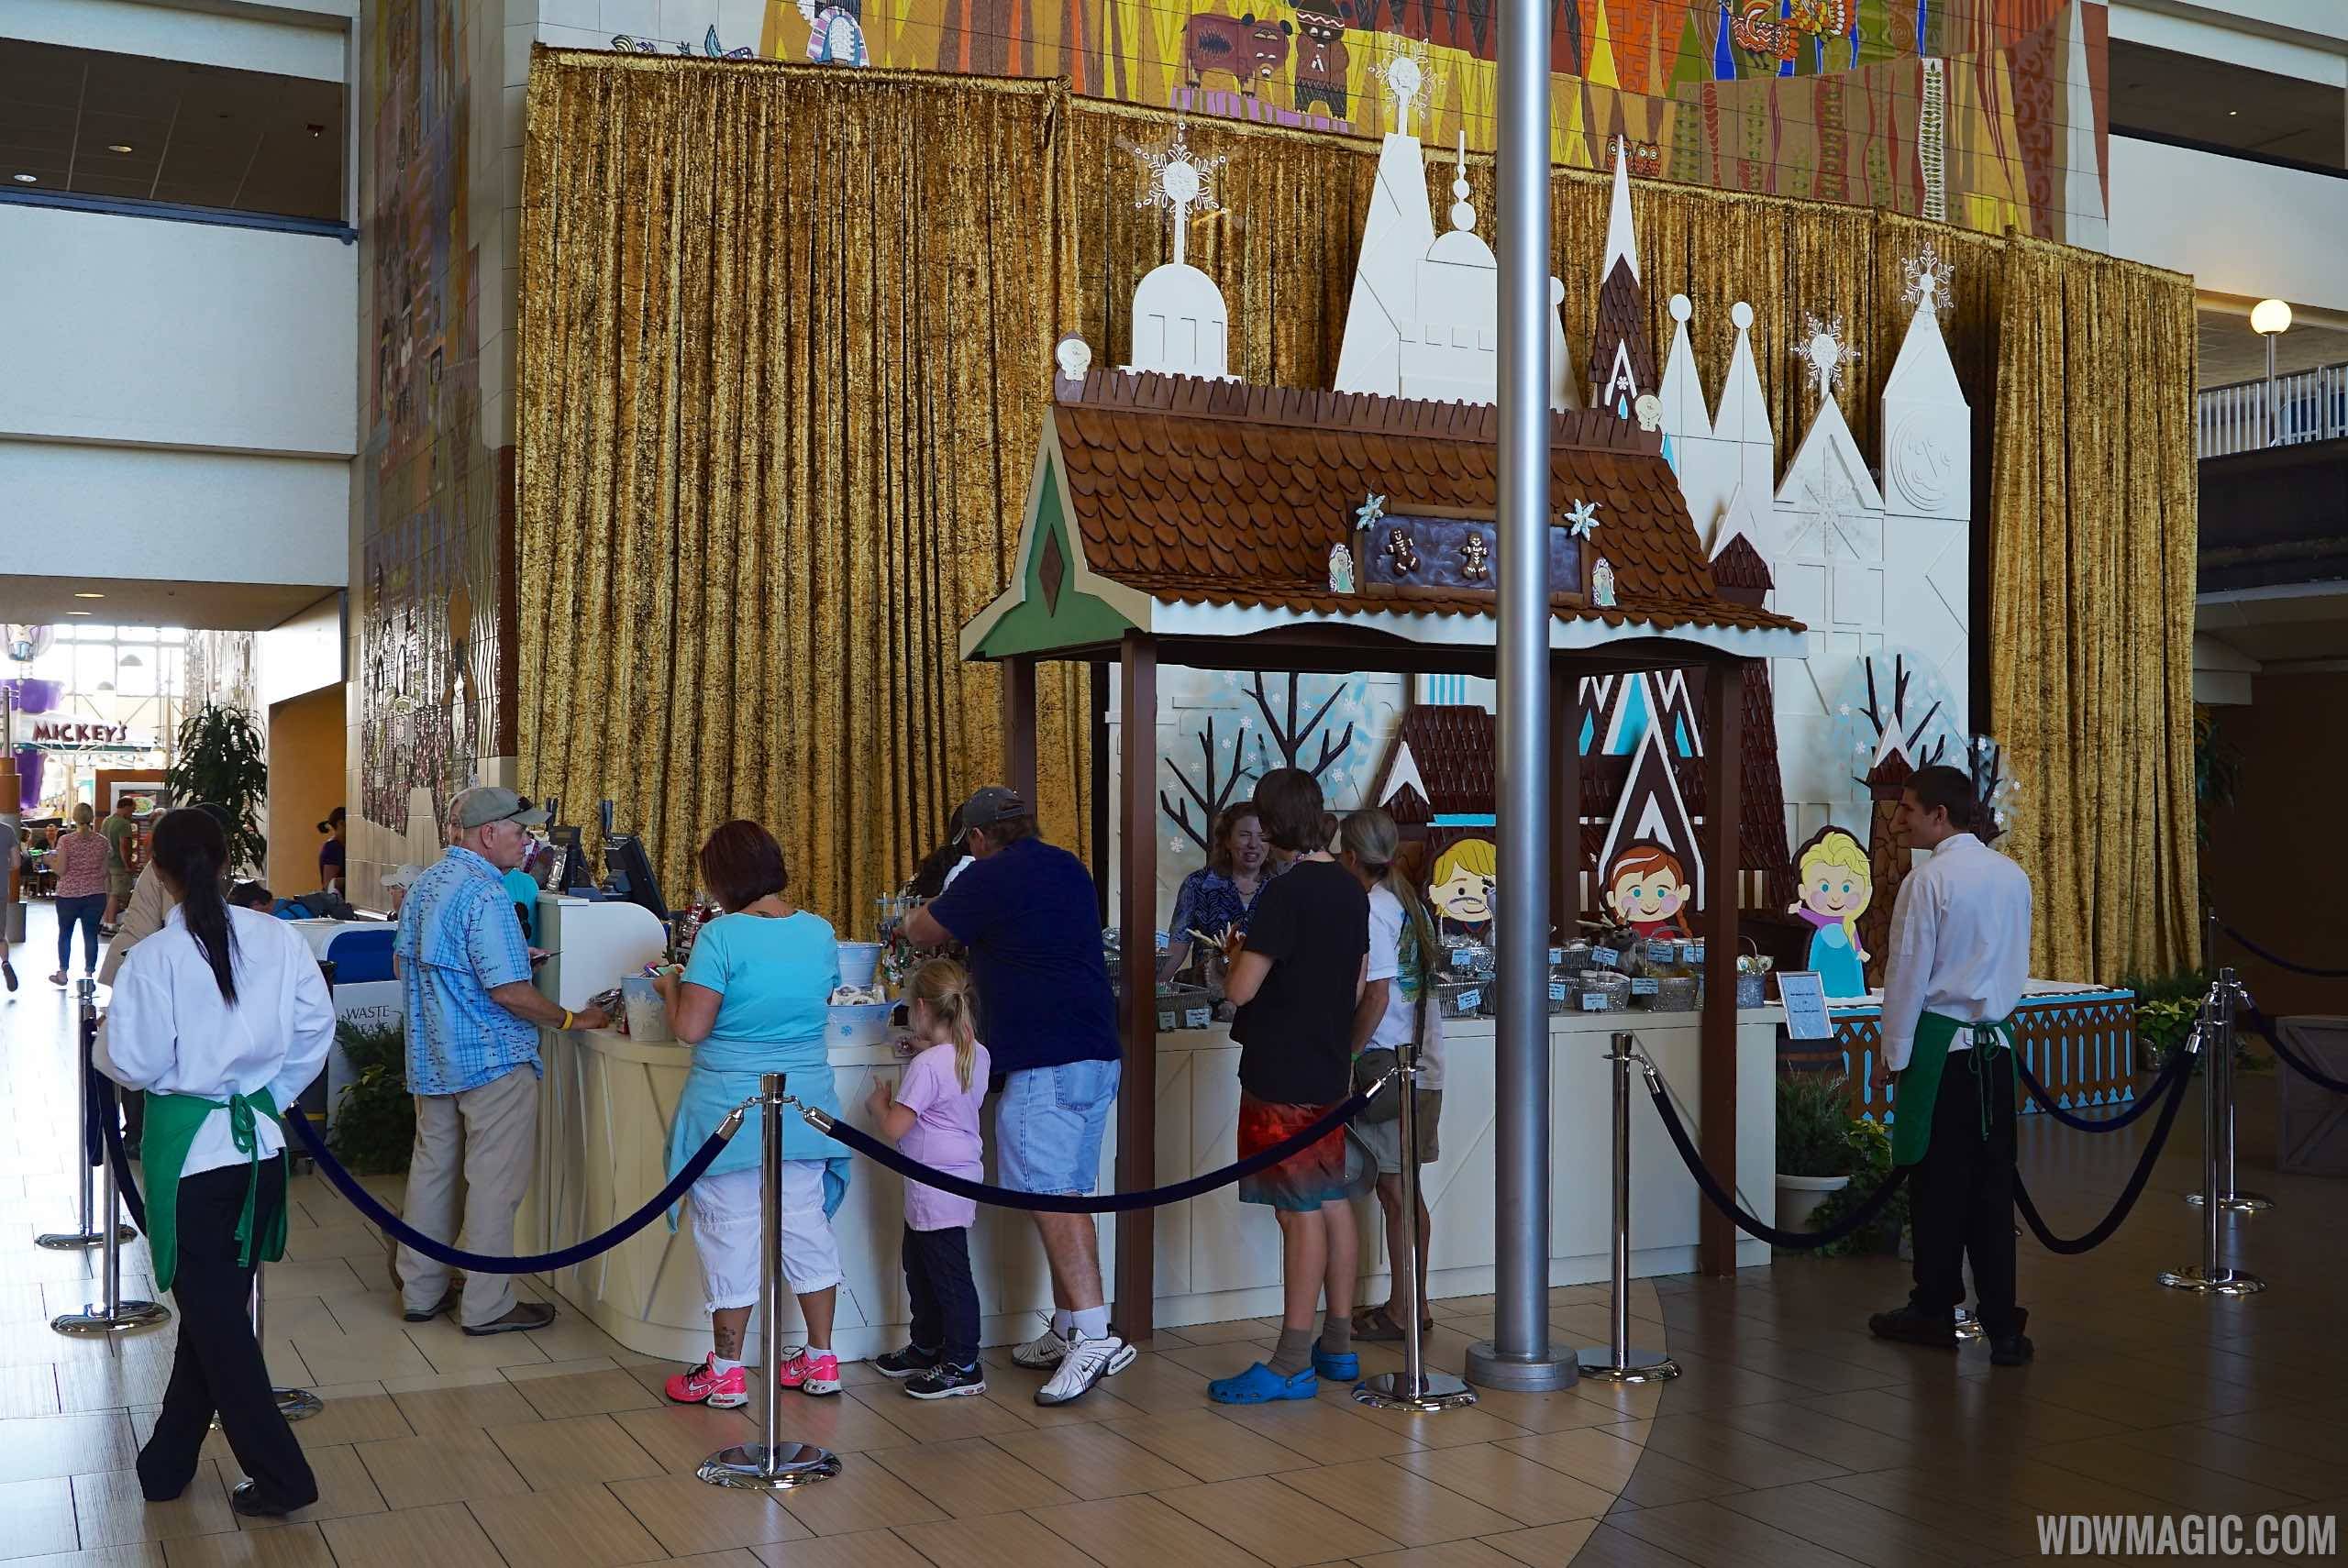 PHOTOS - 'Frozen' inspired Gingerbread display opens at Disney's Contemporary Resort